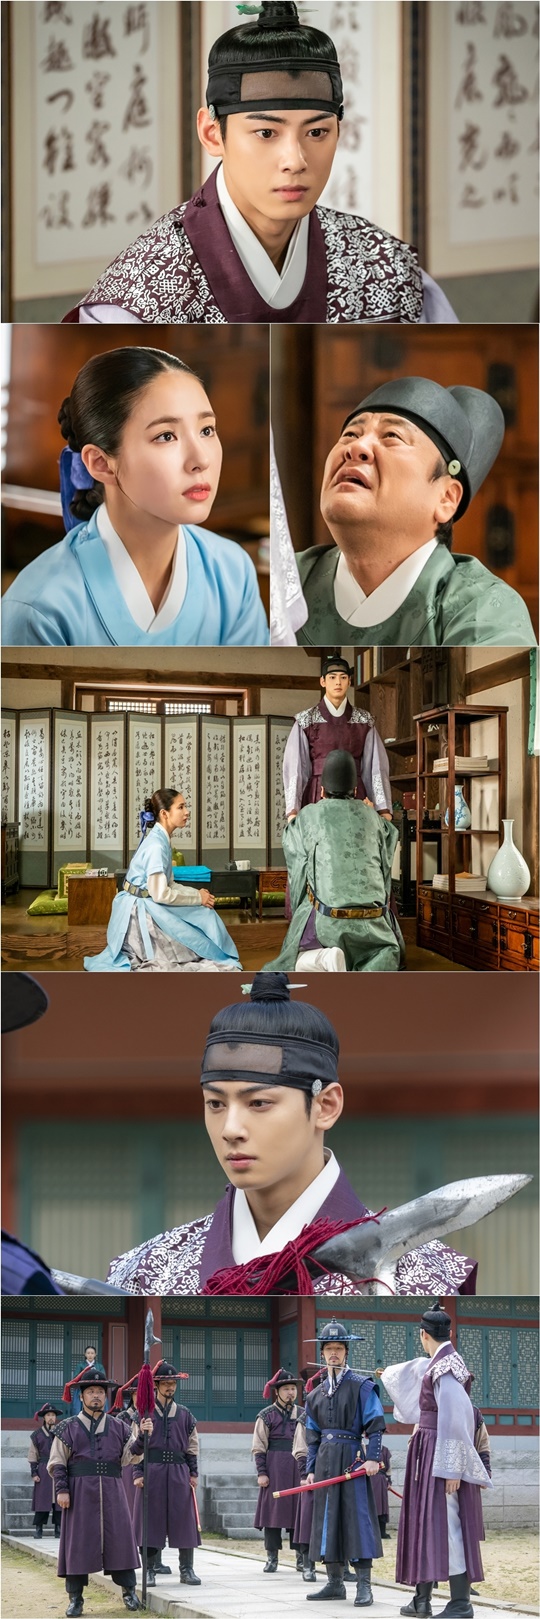 The new officer, Na Hae-ryung, runs into the truth 20 years ago.He not only ignores the dismantling of Shin Se-kyung and the Holy Land, but also shows a charismatic army, such as suppressing the gold army that blocks the front.MBC drama Na Hae-ryung released the image of Lee Rim (Cha Eun-woo) approaching the truth on the 24th.Na Hae-ryung, starring Shin Se-kyung, Cha Eun-woo, and Park Ki-woong, is the first problematic first lady of Joseon (Shin Se-kyung) and the anti-war mother Solo Prince Lee Rims Phil full romance release.Lee Ji-hoon, Park Ji-hyun, and Kim Yeo-jin, Kim Min-sang, Choi Duk-moon, and Sung Ji-ru.In the 33-36th episode of Na Hae-ryung, a new employee, Lee Rim was shown to be the enemy of Lee Kyeom (Yoon Jong-hoon) of Heeyoung County, the former president of the U.S.It was also surprising that Lee was a teacher in the Hodam Teachers Exhibition, which is the center of all events.Na Hae-ryung and Irim discovered the link between Kim Il-moks Sacho and Nokseodang, which contain all the truths of the incident 20 years ago, and approached the truth and raised interest in future development.Na Hae-ryung in the public photo is looking at the Leerim of a firm eye.This is the situation where Lee Lim decided to visit Kim Yeo-jin and ask for the truth.In this regard, Heo Sam-bo (Seong Ji-ru) of the inner circle holds I-rims leg and begs begging him not to go to the preparations, while I-rim is turning away from him, which makes him sad.Then, while Na Hae-ryung and Sambo were heading for the preparations, Irim was restrained by the gold army.Soon, Irim is aiming at the gold soldiers who stop him, and he is shooting charisma that can not be tolerated, amplifying the tension.As such, Lee Lim is foreseeing that he will run into the past 20 years ago as the enemy of the King Hee Young-gun, and the truth will be revealed and what kind of blue will happen.I am going to visit Lim in preparation for the release of Na Hae-ryung and Sambo, said Na Hae-ryung, a new employee. I would like to ask for your attention until the end of the conversation with Lim, who is the only relative of his family.Meanwhile, Na Hae-ryung, starring Shin Se-kyung, Cha Eun-woo and Park Ki-woong, will be broadcast 37-38 times at 8:55 pm on Wednesday, the 25th.